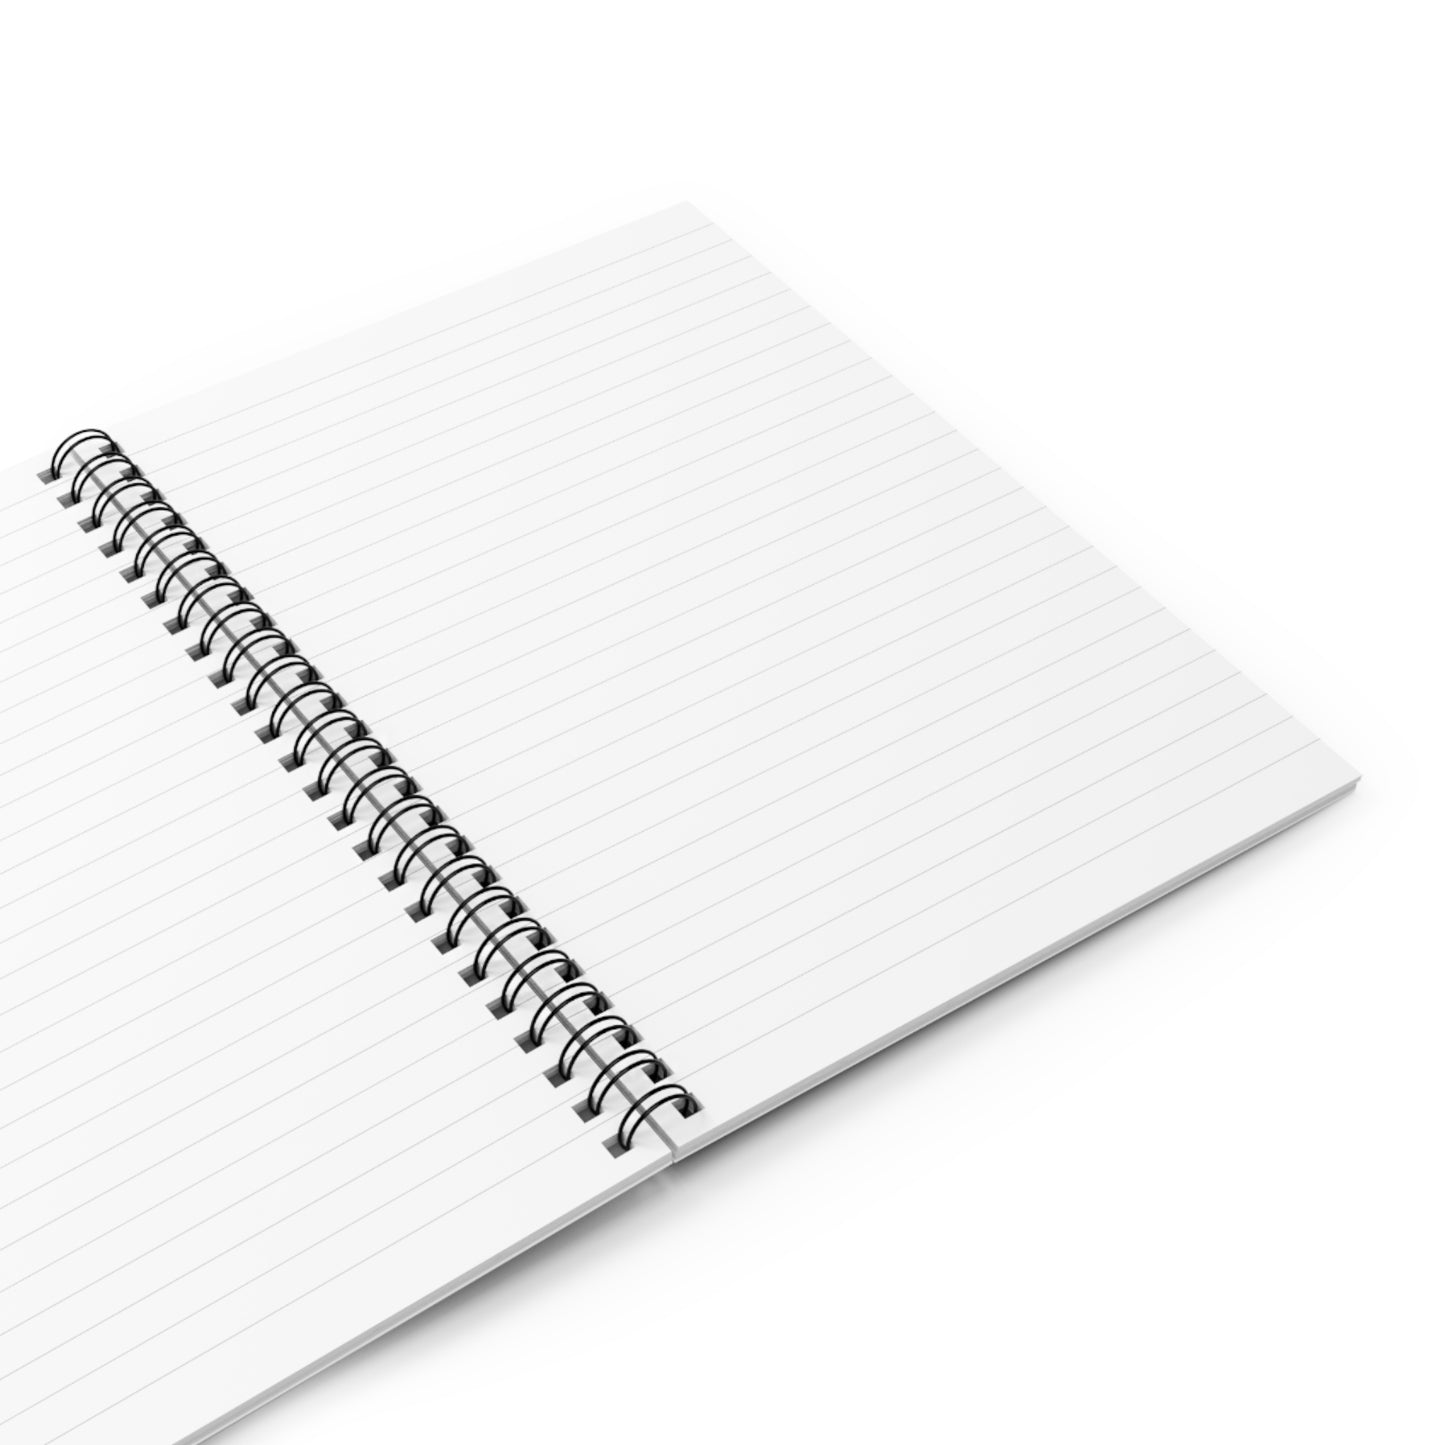 Obliterated | Spiral Notebook - Ruled Line